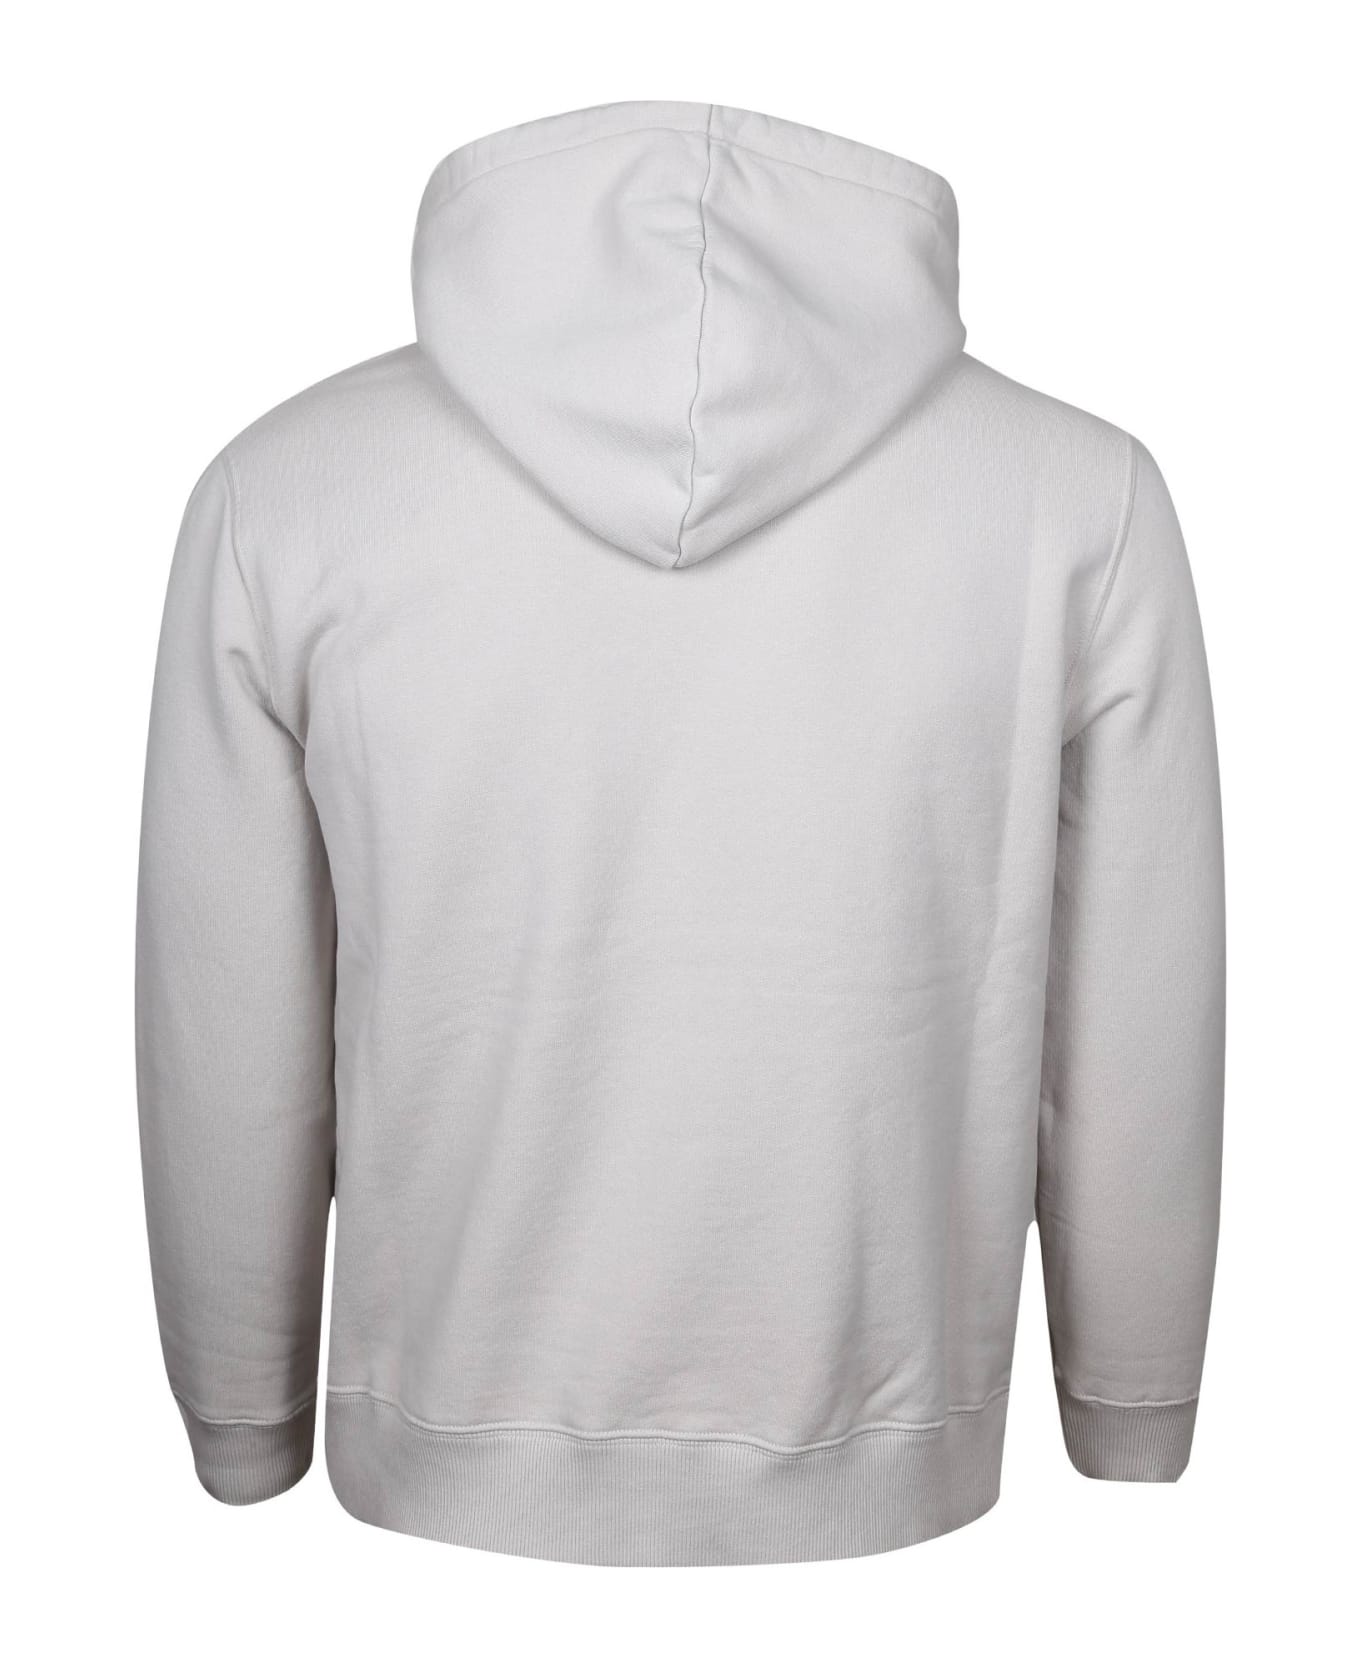 Lanvin Cotton Hoodie With Logo - MASTIC